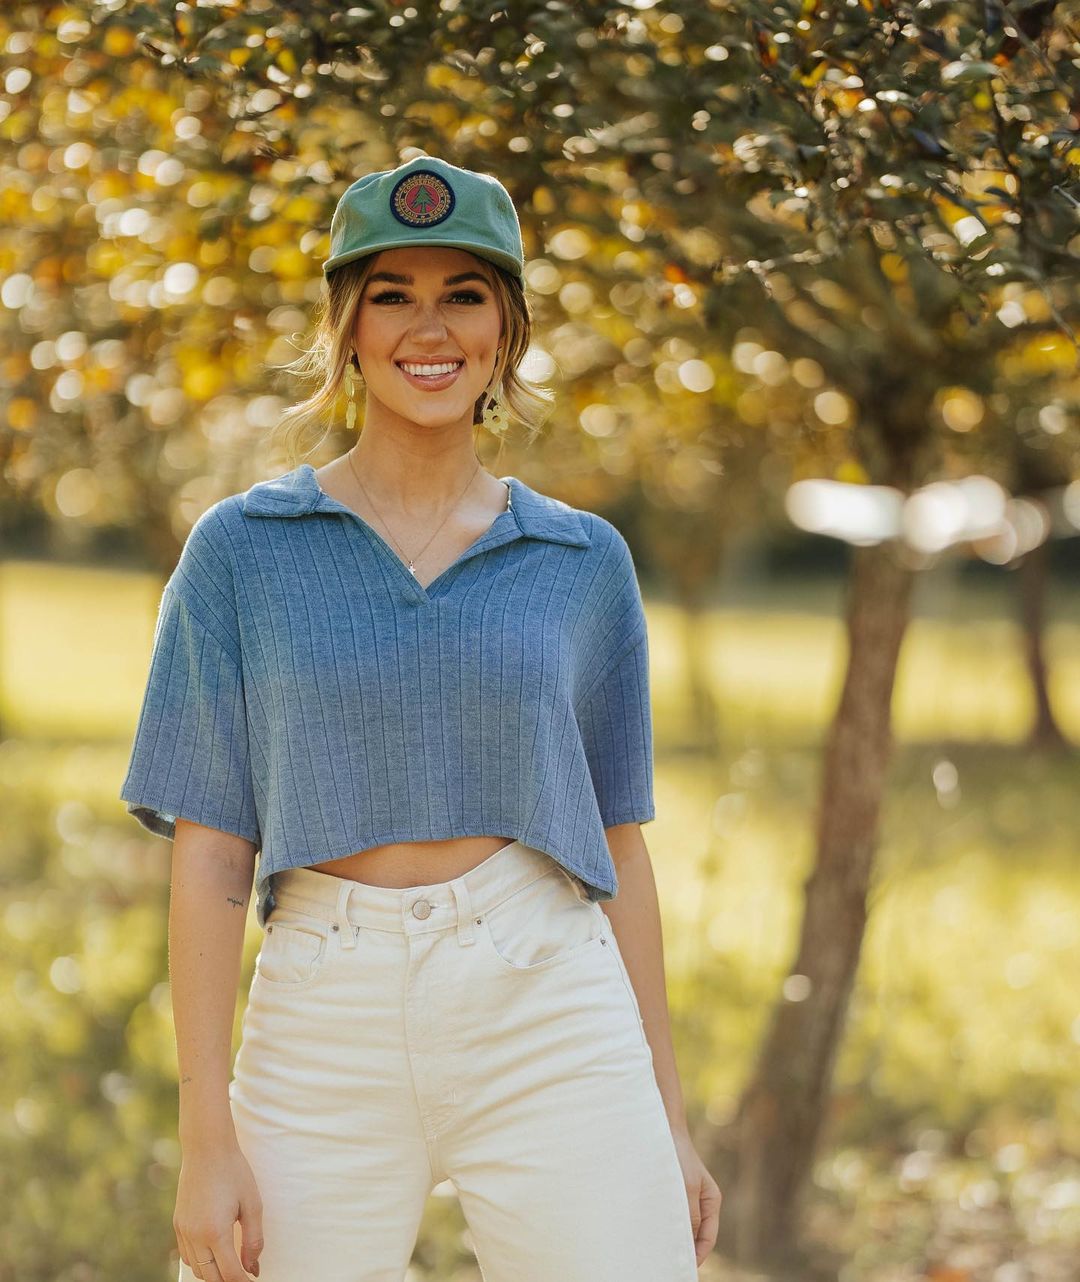 Sadie Robertson (Actress) Wiki, Biography, Age, Boyfriend, Family, Facts and More